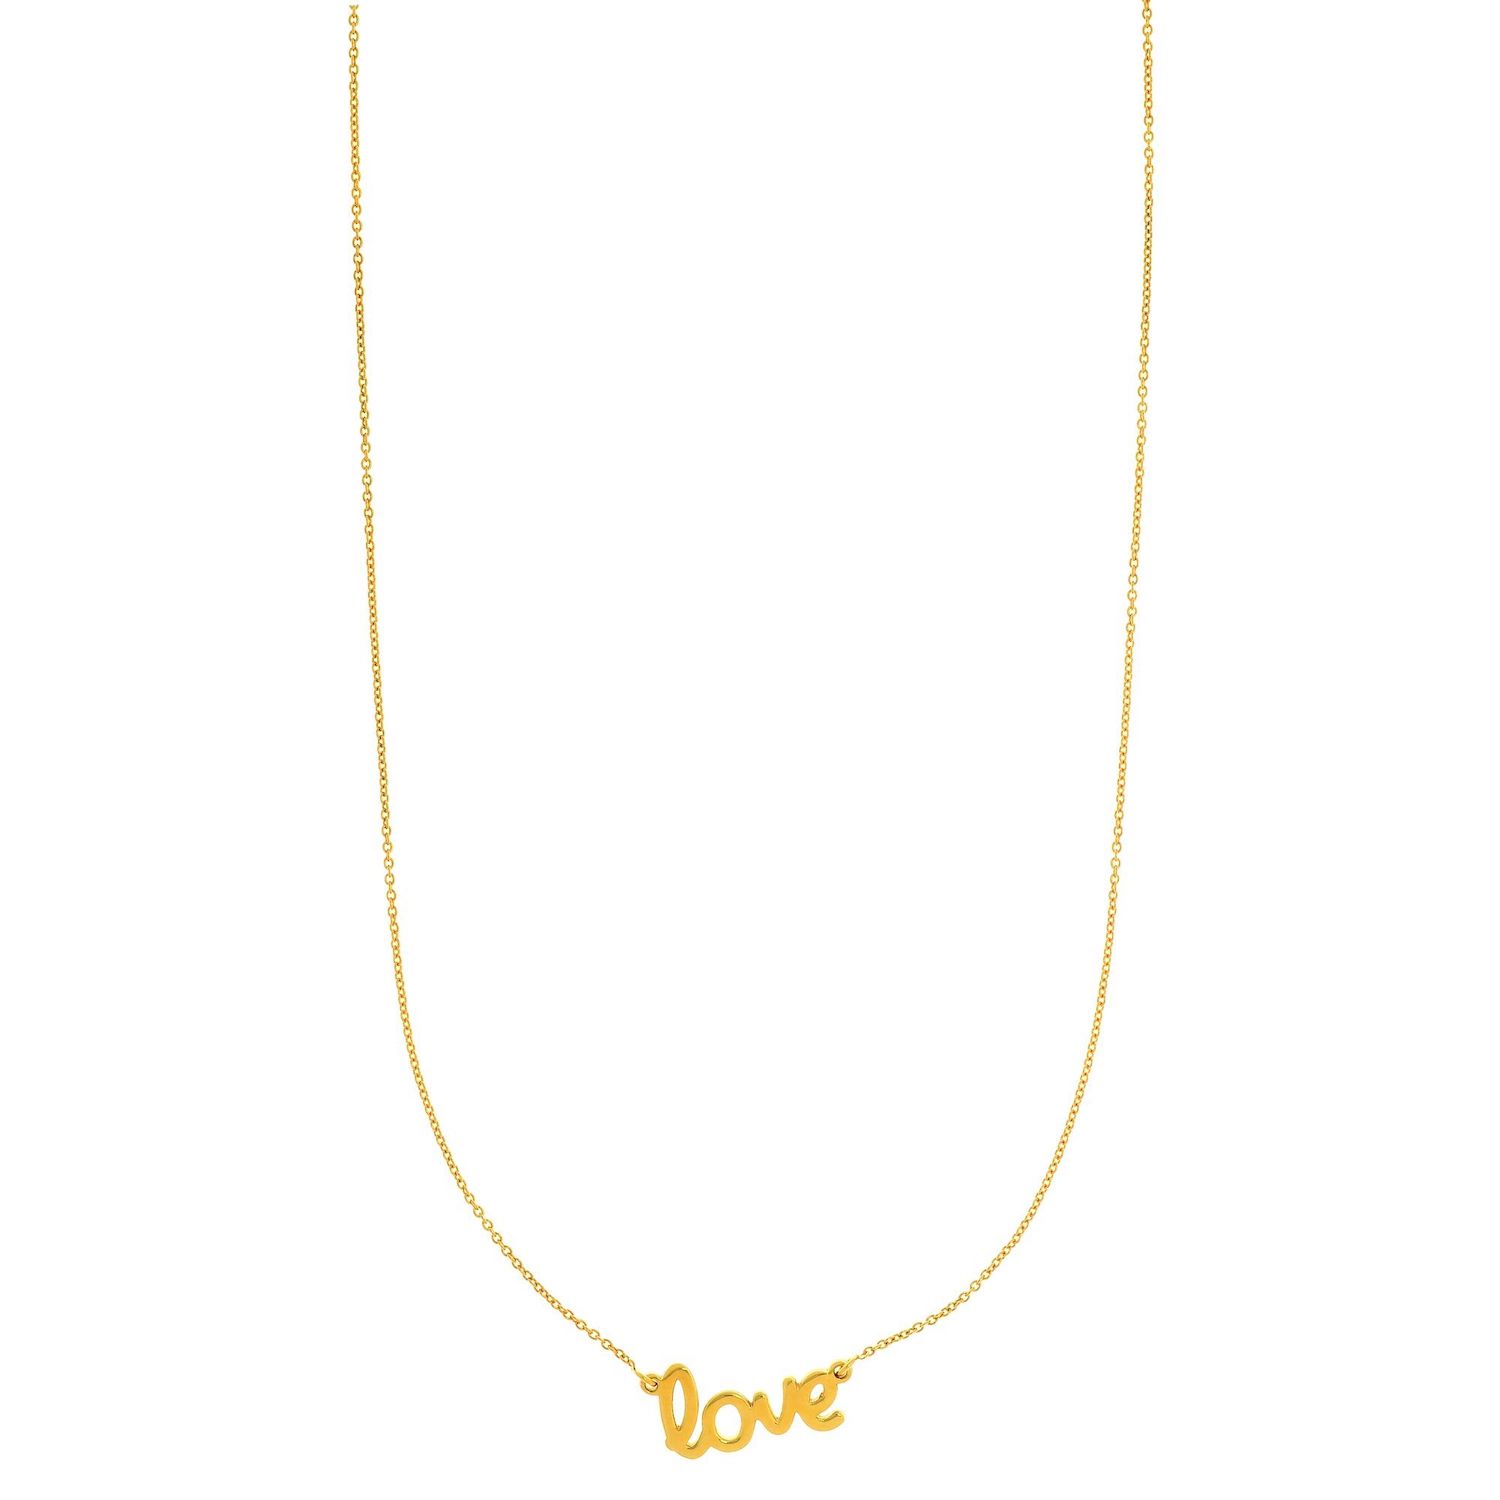 14K Gold Rose Yellow LOVE Pendant Chain Necklace 16"-18" Adjustable - Yellow Gold